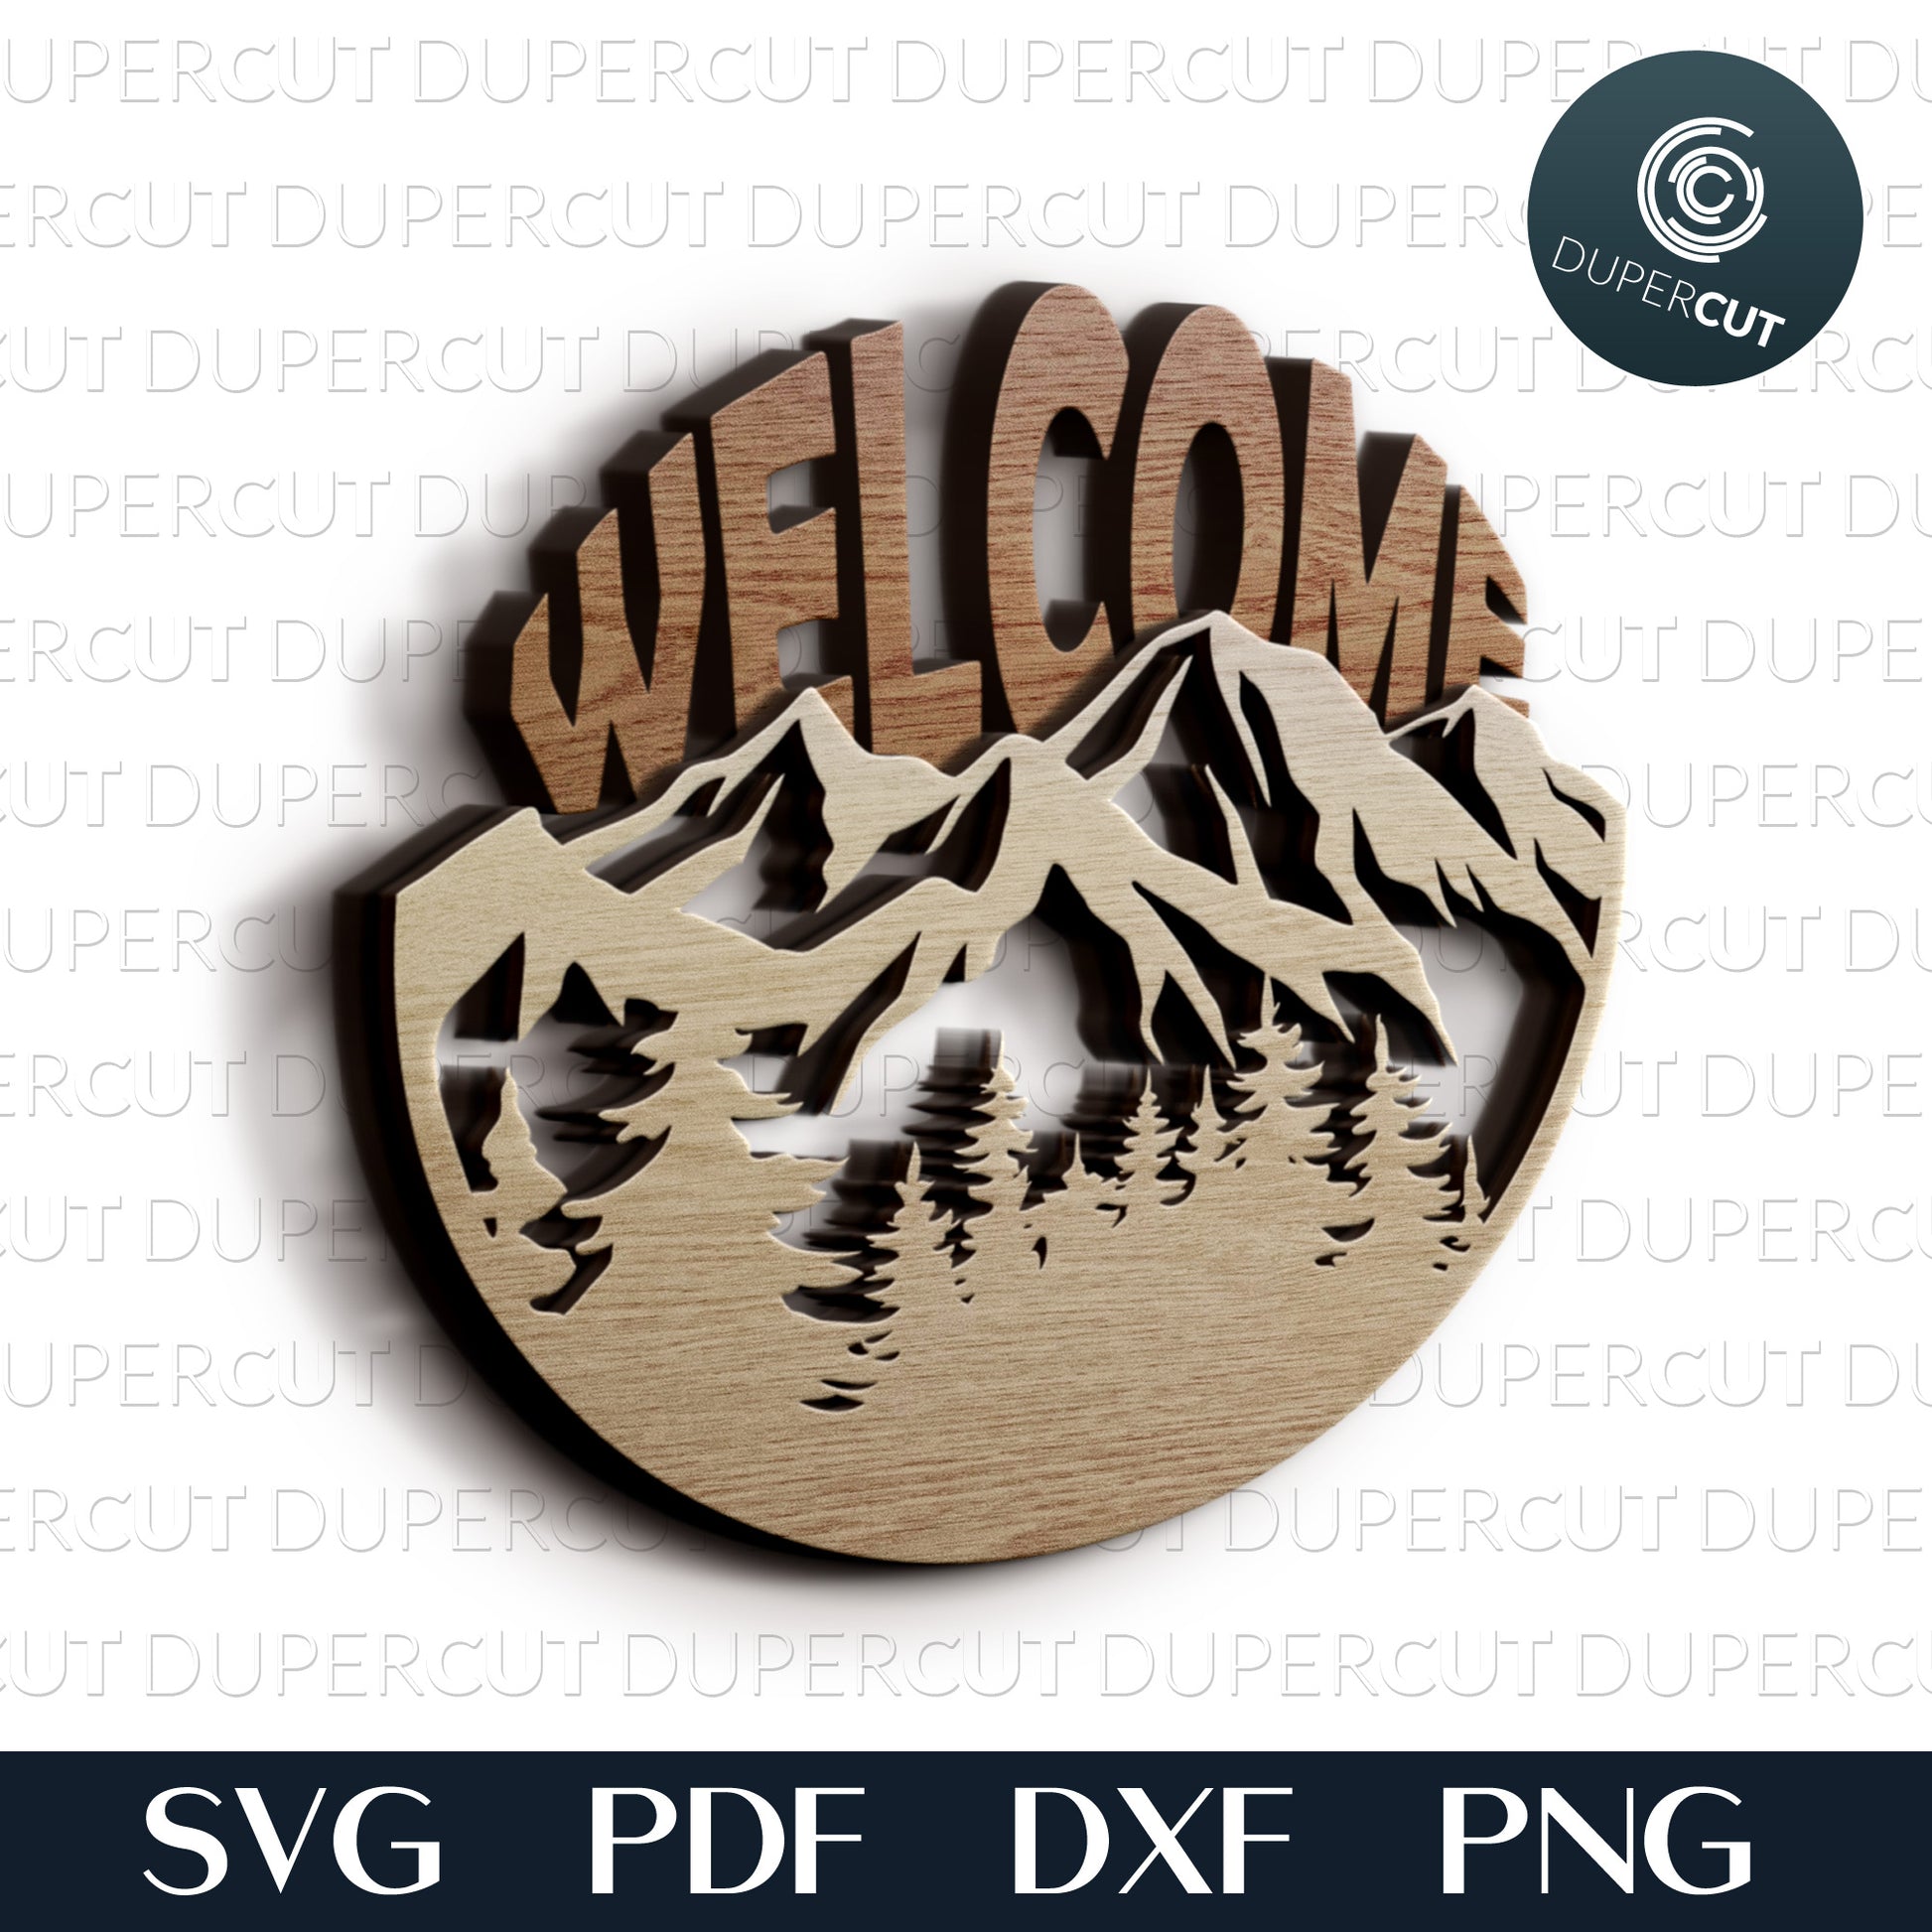 Mountains scene layered welcome sign files. SVG PDF DXF cutting template for laser cutting, engraving, Glowforge, Cricut, Silhouette, CNC plasma